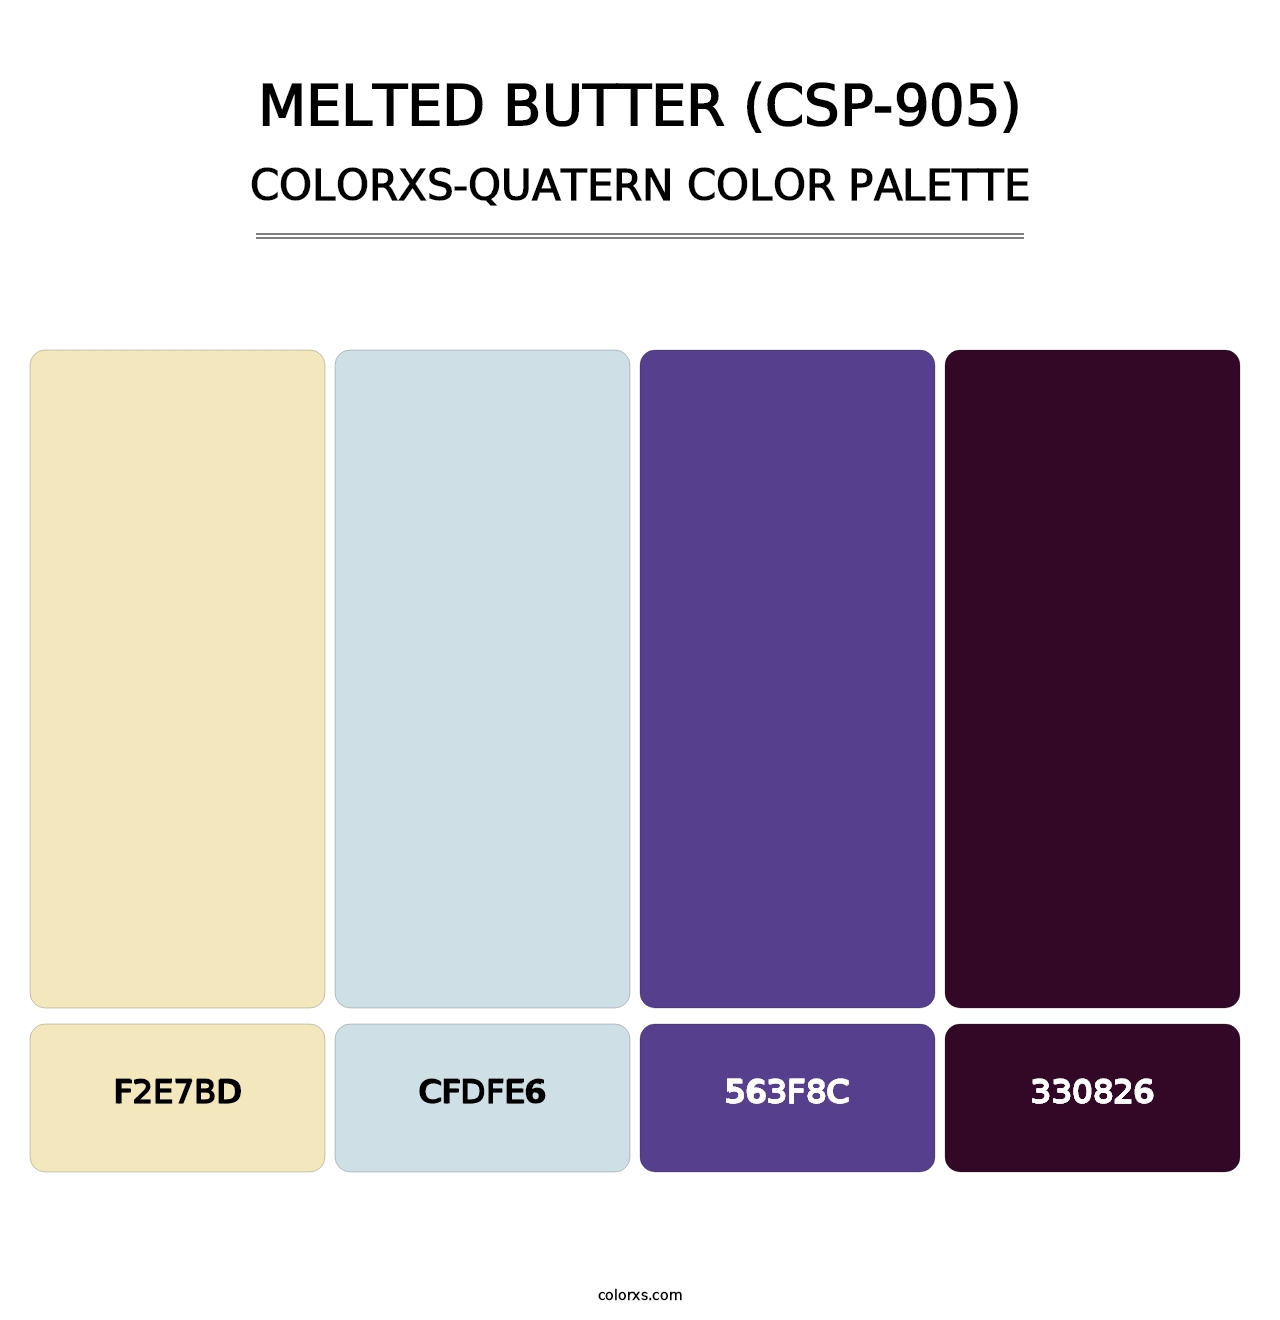 Melted Butter (CSP-905) - Colorxs Quatern Palette